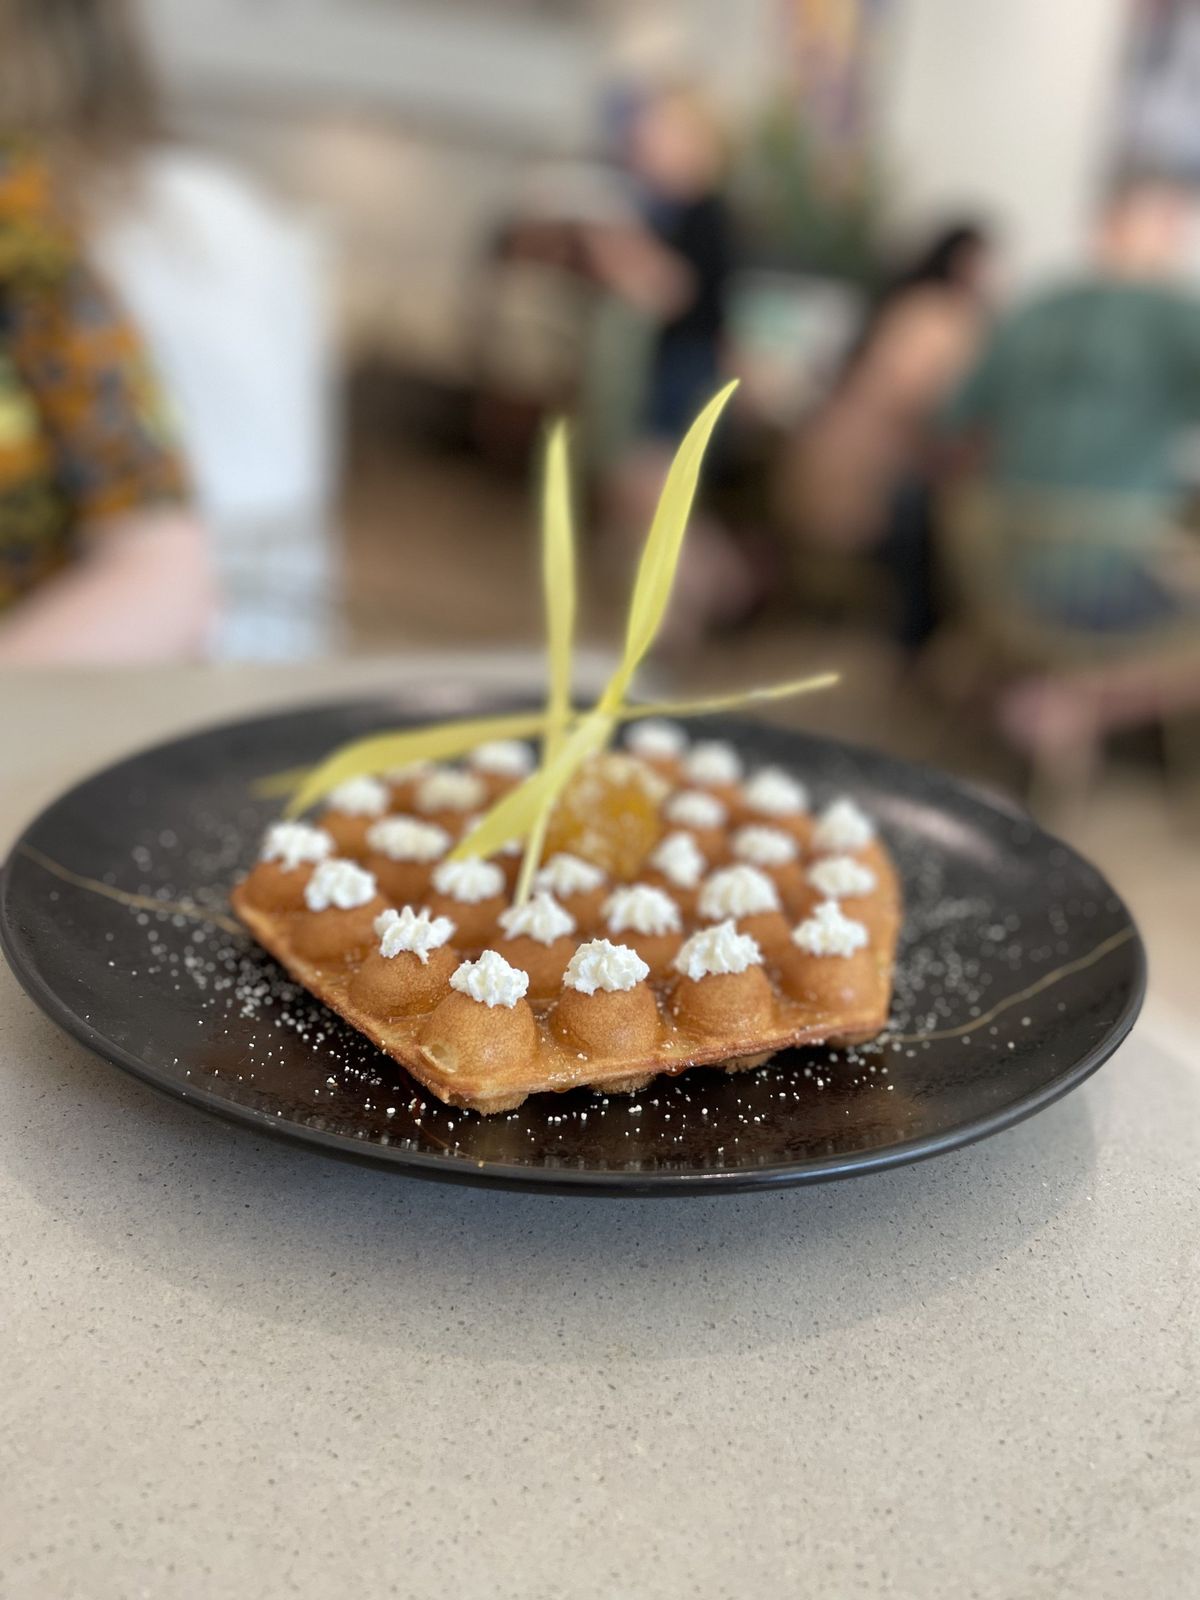 This Bubble waffle has dollops of goat cheese and a local honeycomb center. The waffle has been updated for the summer season to include lemon ricotta, huckleberry aquafaba, granola and poppyseeds.  (Lindsey Treffry/The Spokesman-Review)